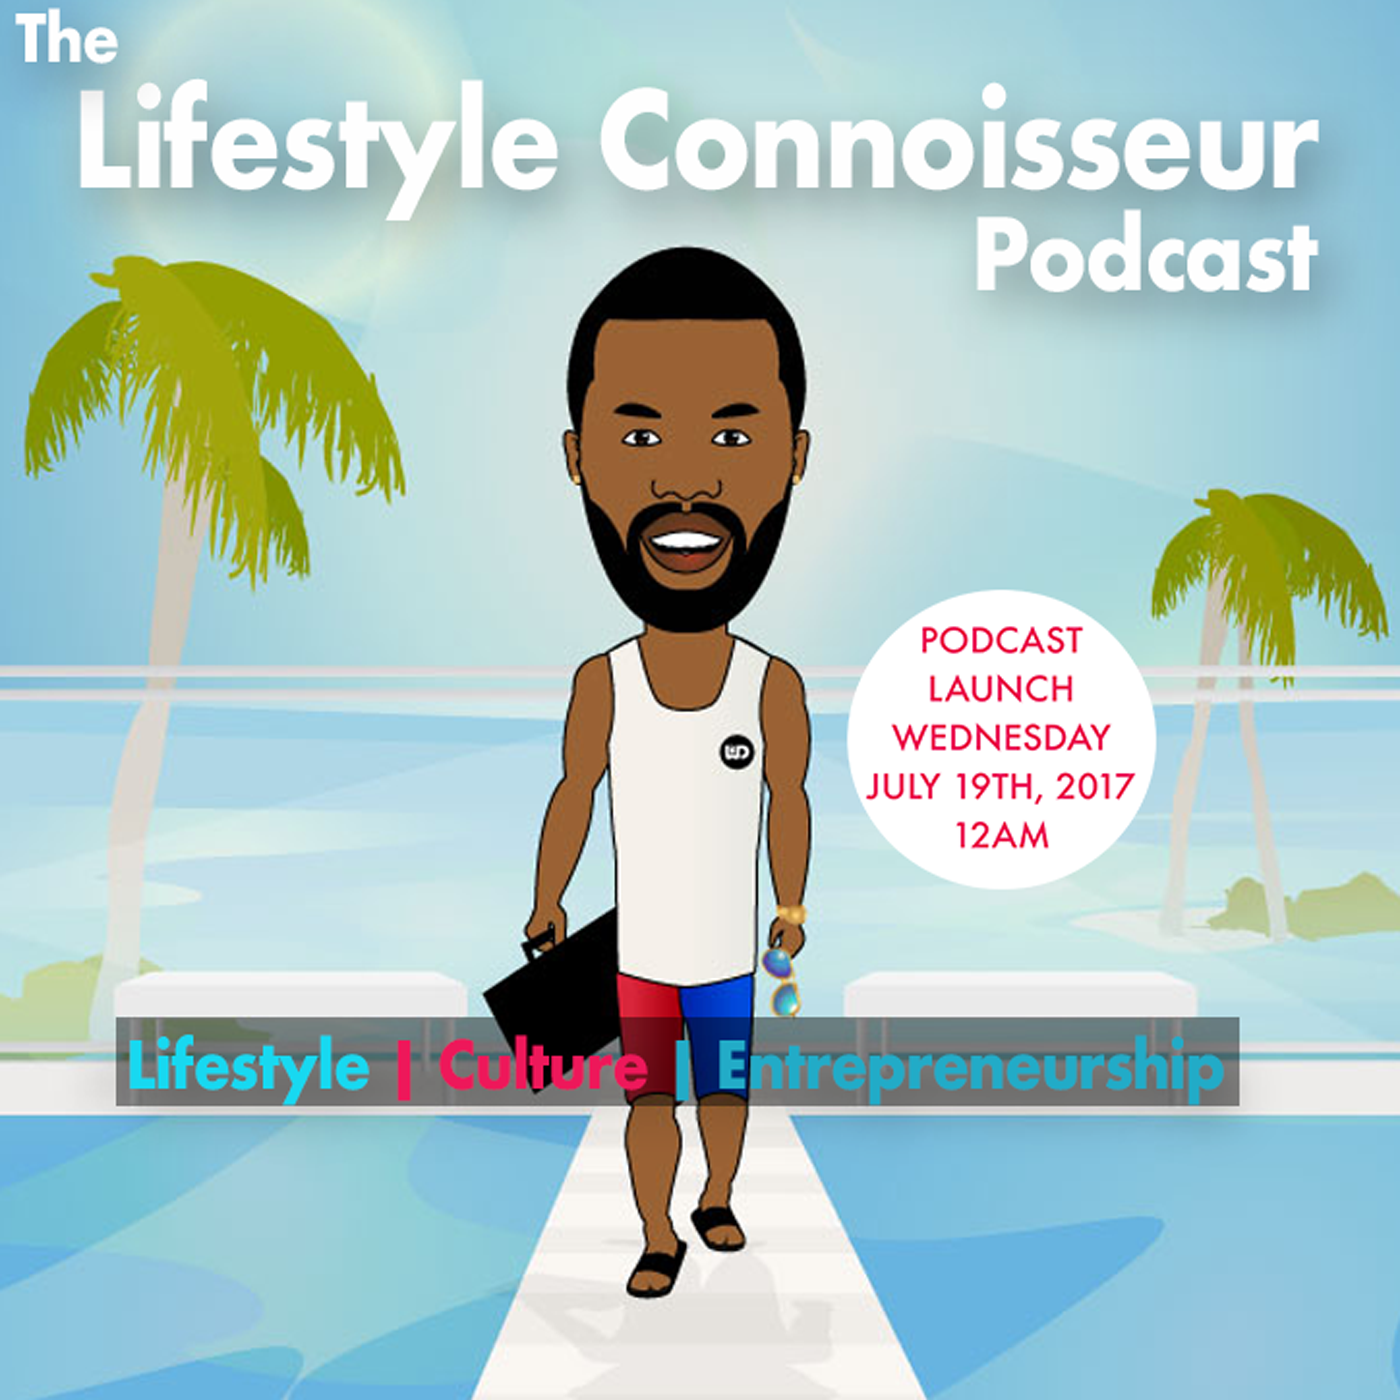 The Lifestyle Connoisseur Podcast hosted by Jean-Désir